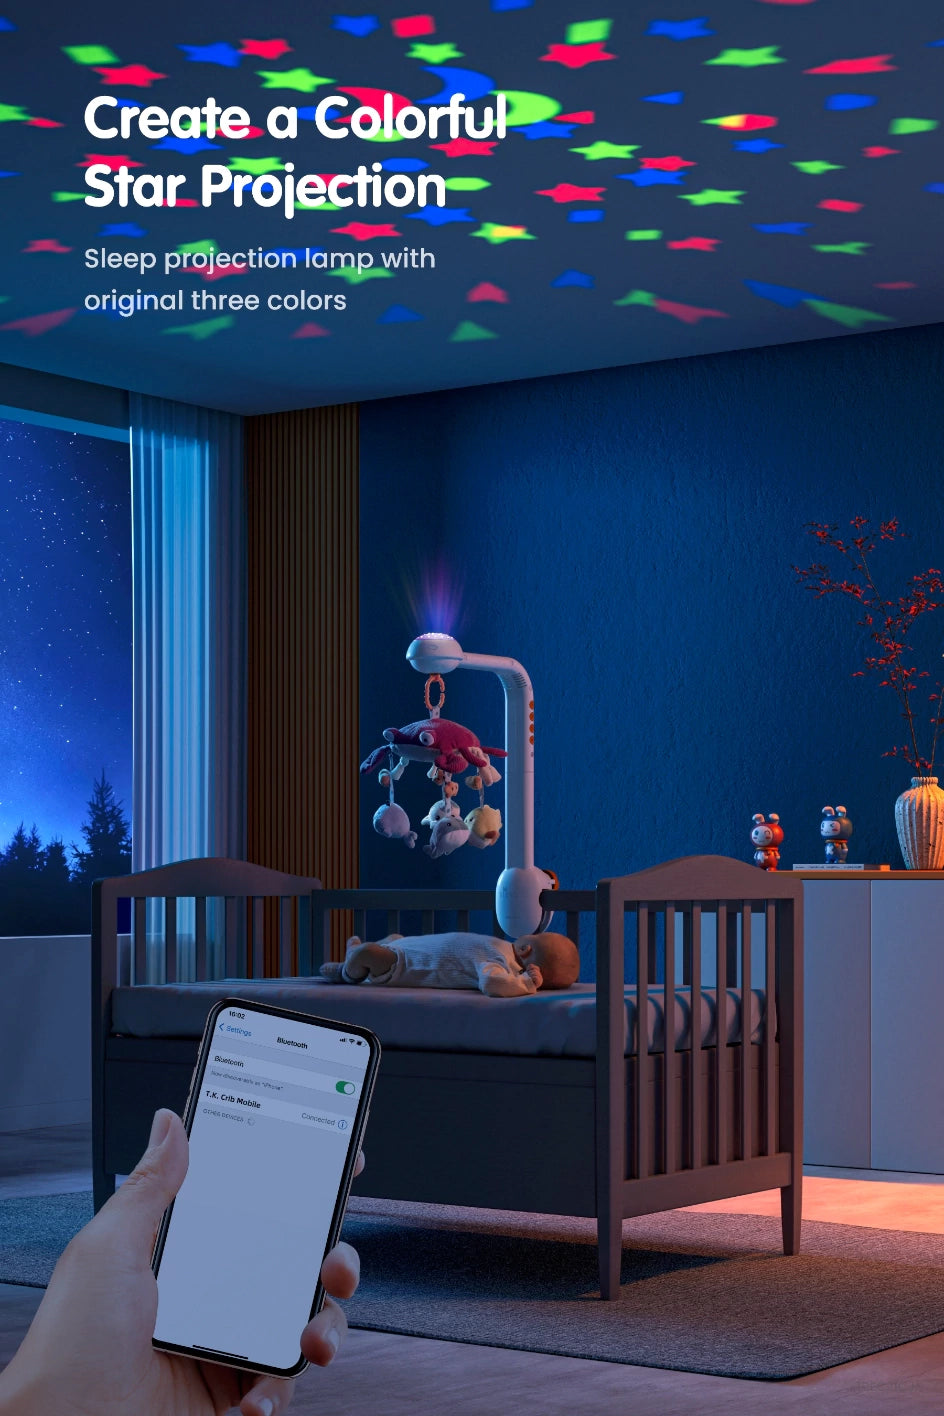 bluetooth crib toys with projection night light create afoloful star projection